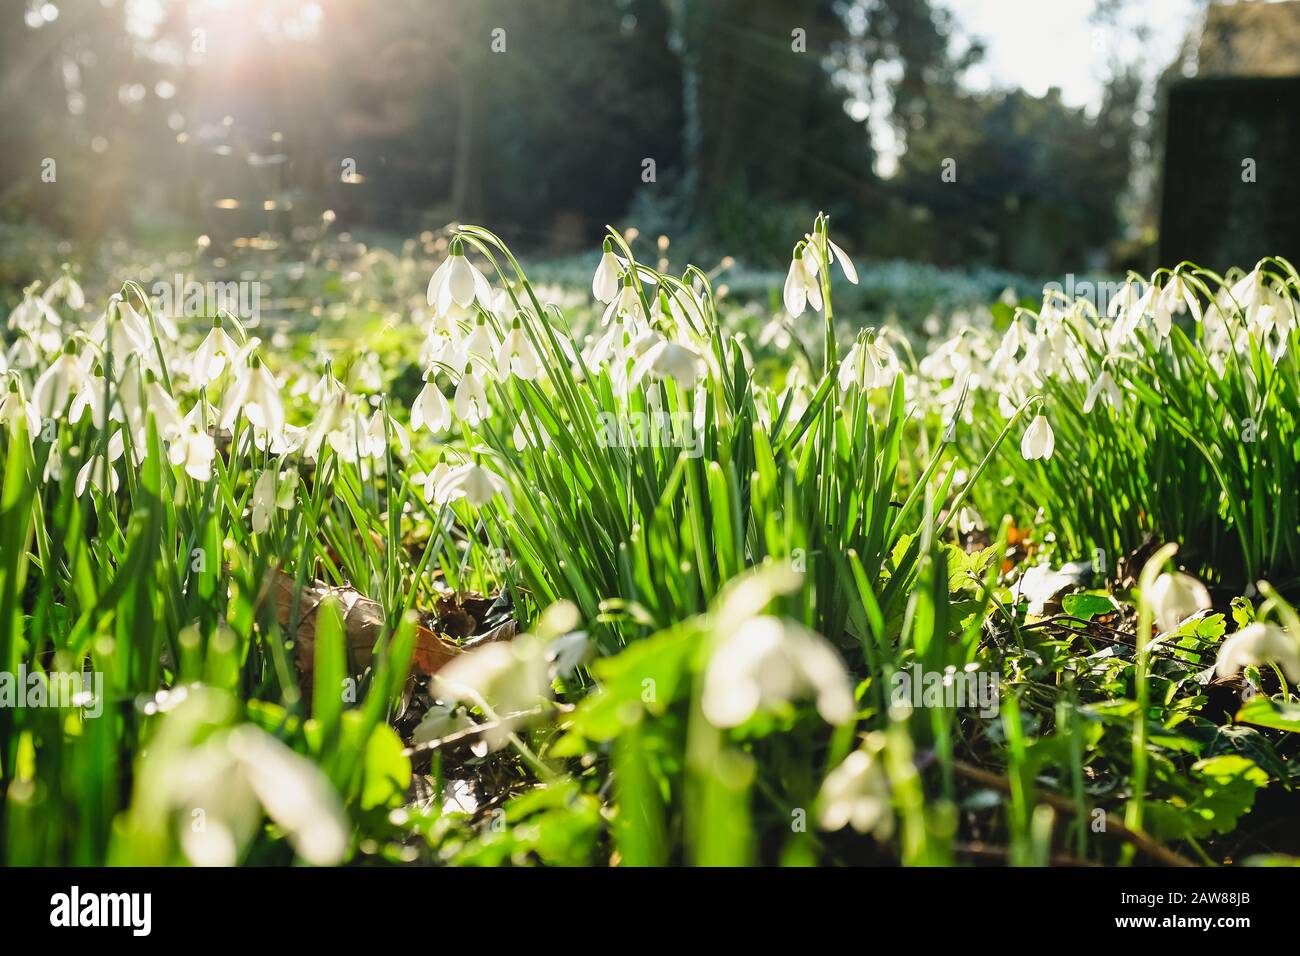 Backlit white snowdrop lowers growing outdoors in a field Stock Photo